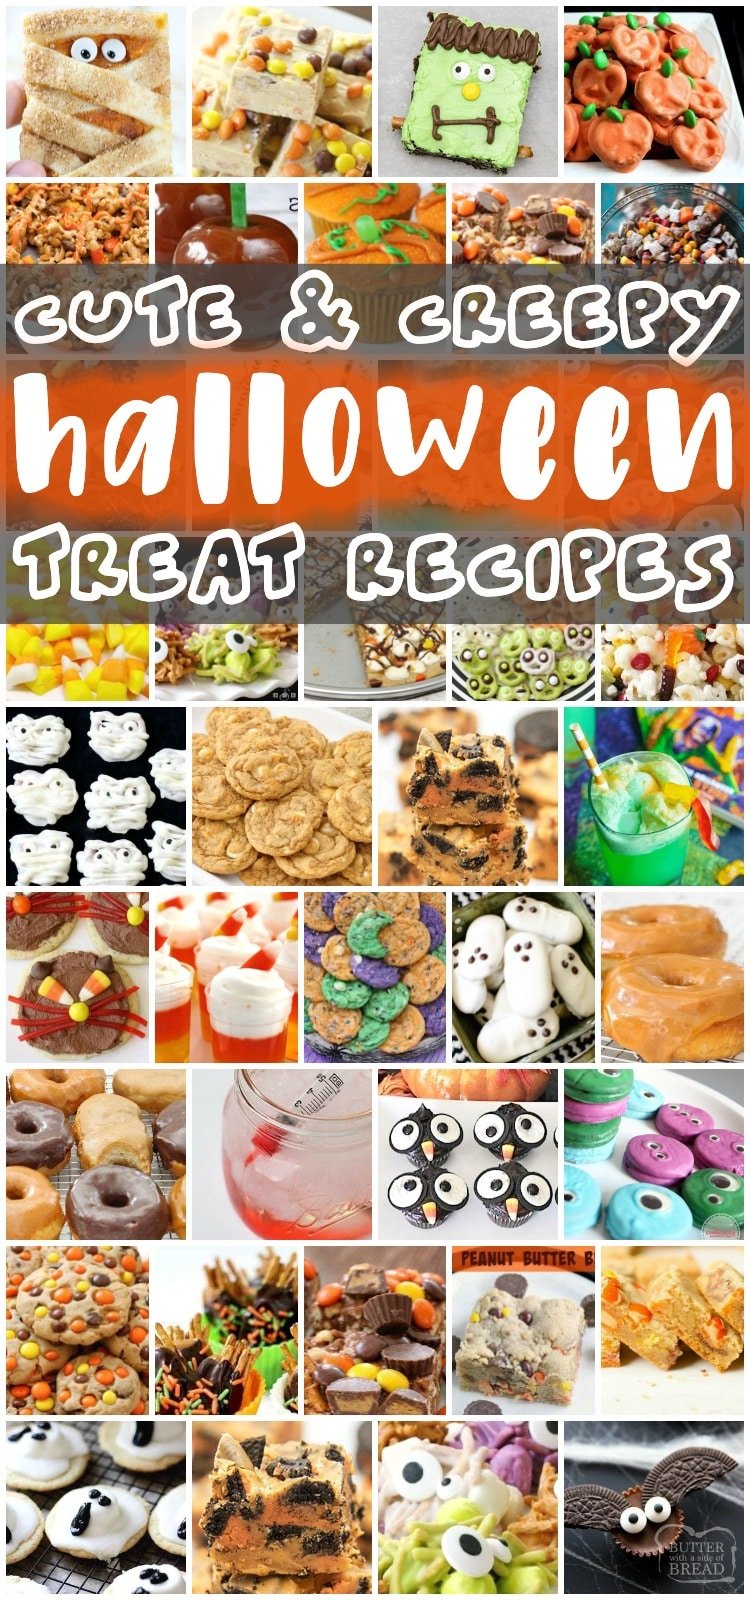 These cute & creepy Halloween treats are perfect for parties! Cute, creepy, spooky and DELICIOUS! Here are all the Halloween treats you need to make this Halloween one to remember!